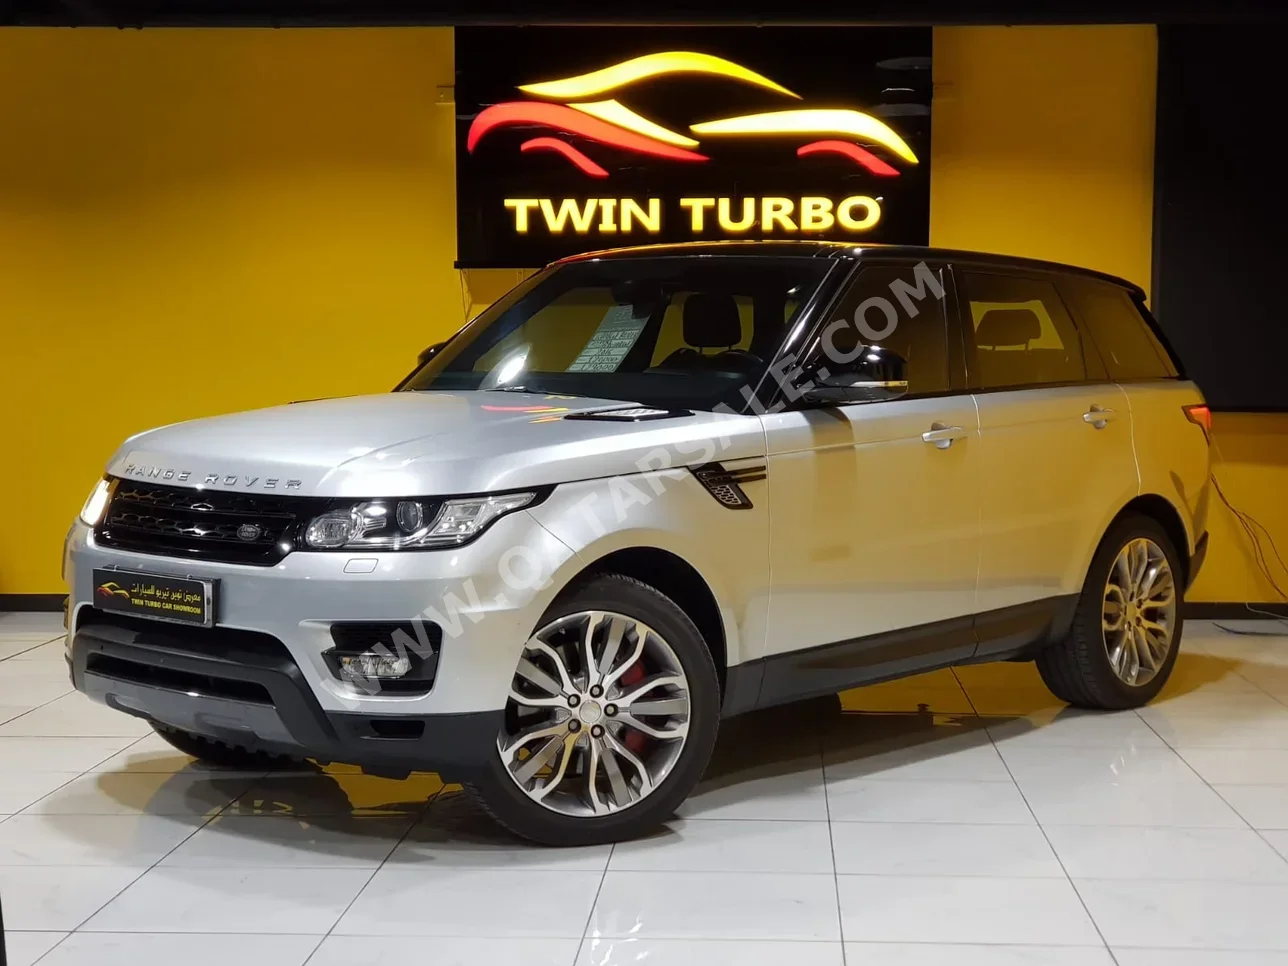 Land Rover  Range Rover  Sport Super charged  2016  Automatic  120,000 Km  8 Cylinder  Four Wheel Drive (4WD)  SUV  Silver